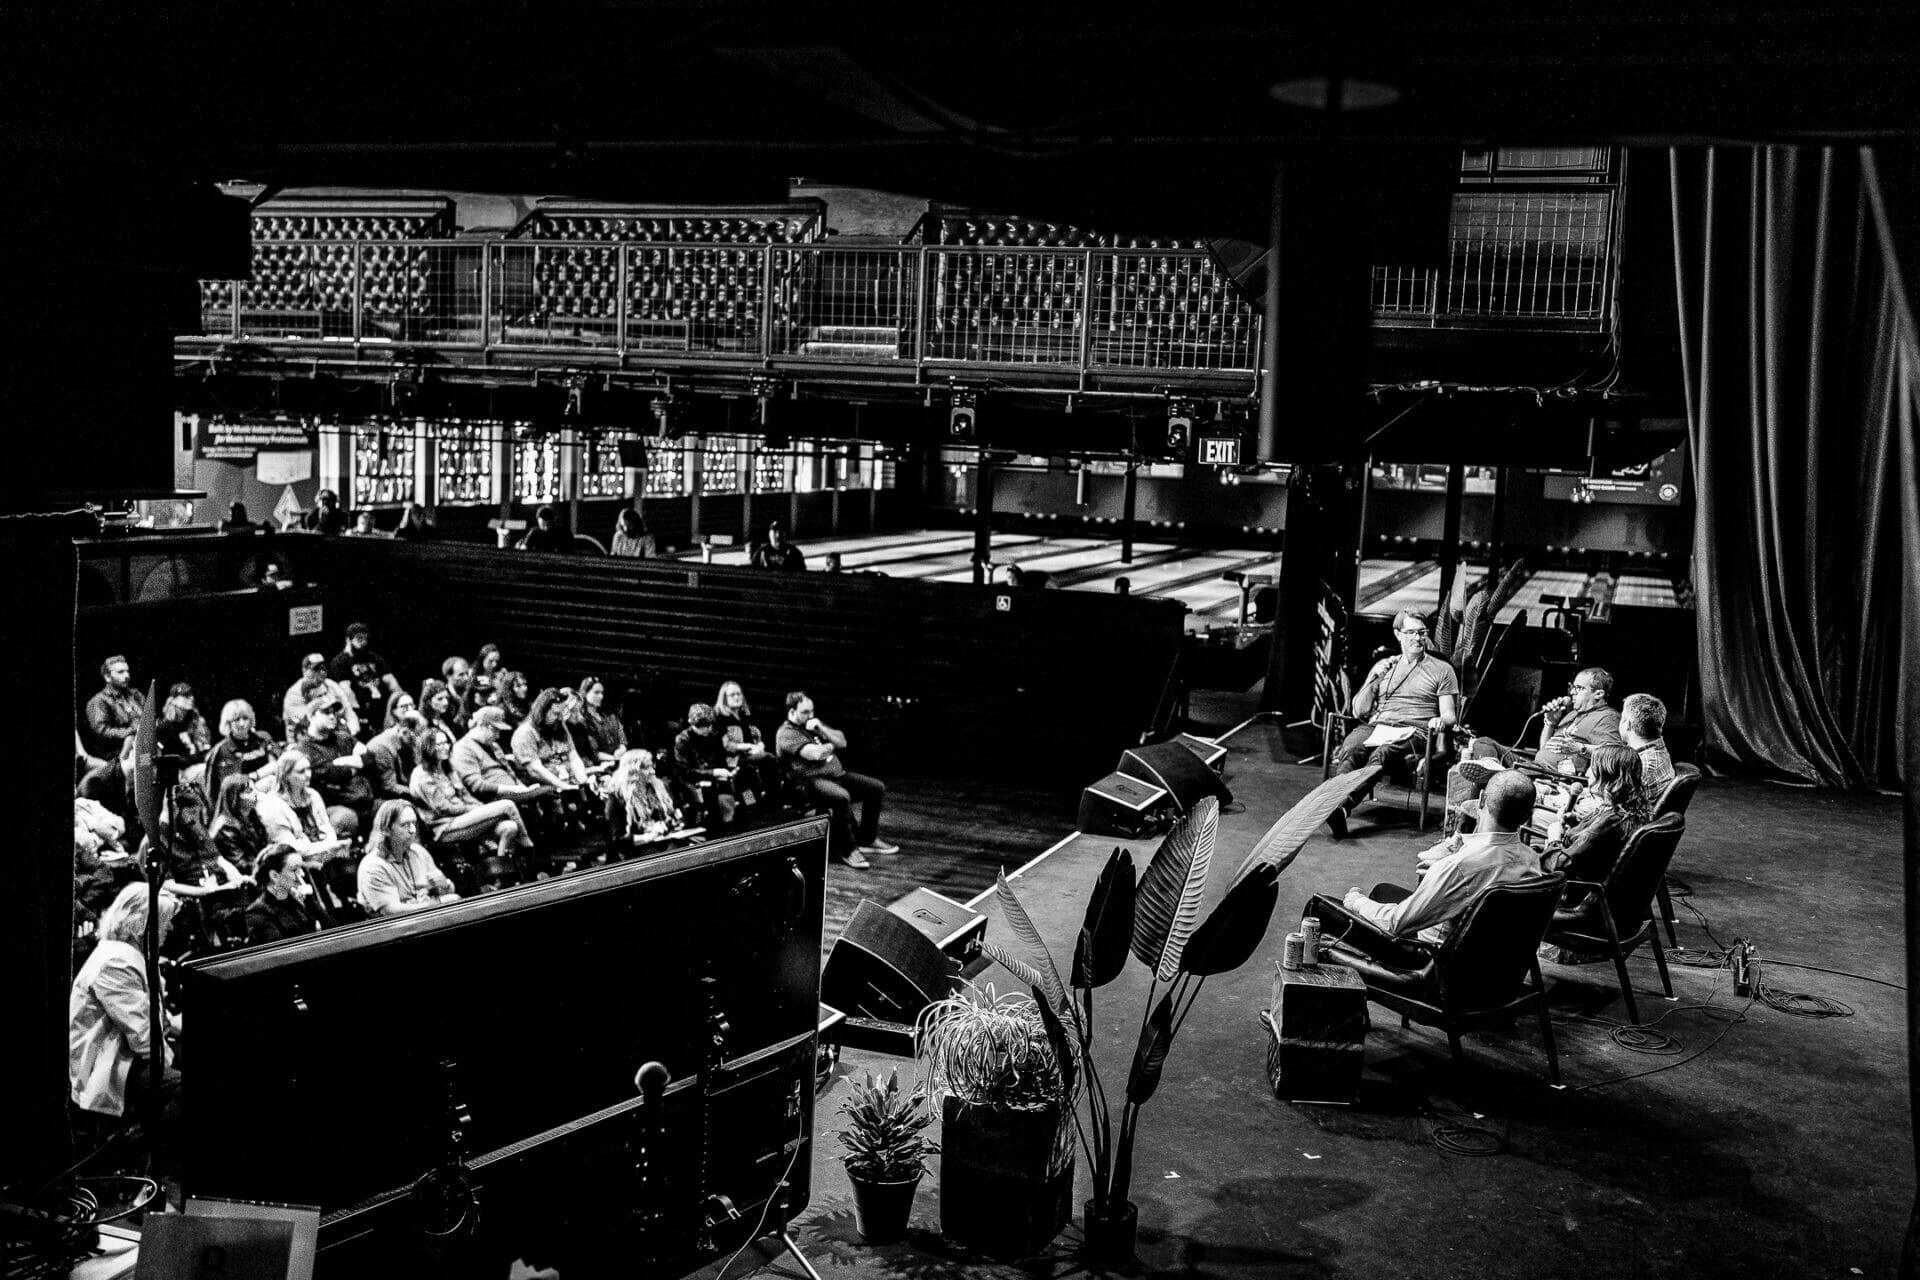 Relix Music Conference Concludes at Brooklyn Bowl Nashville – Day 2 (A Gallery)